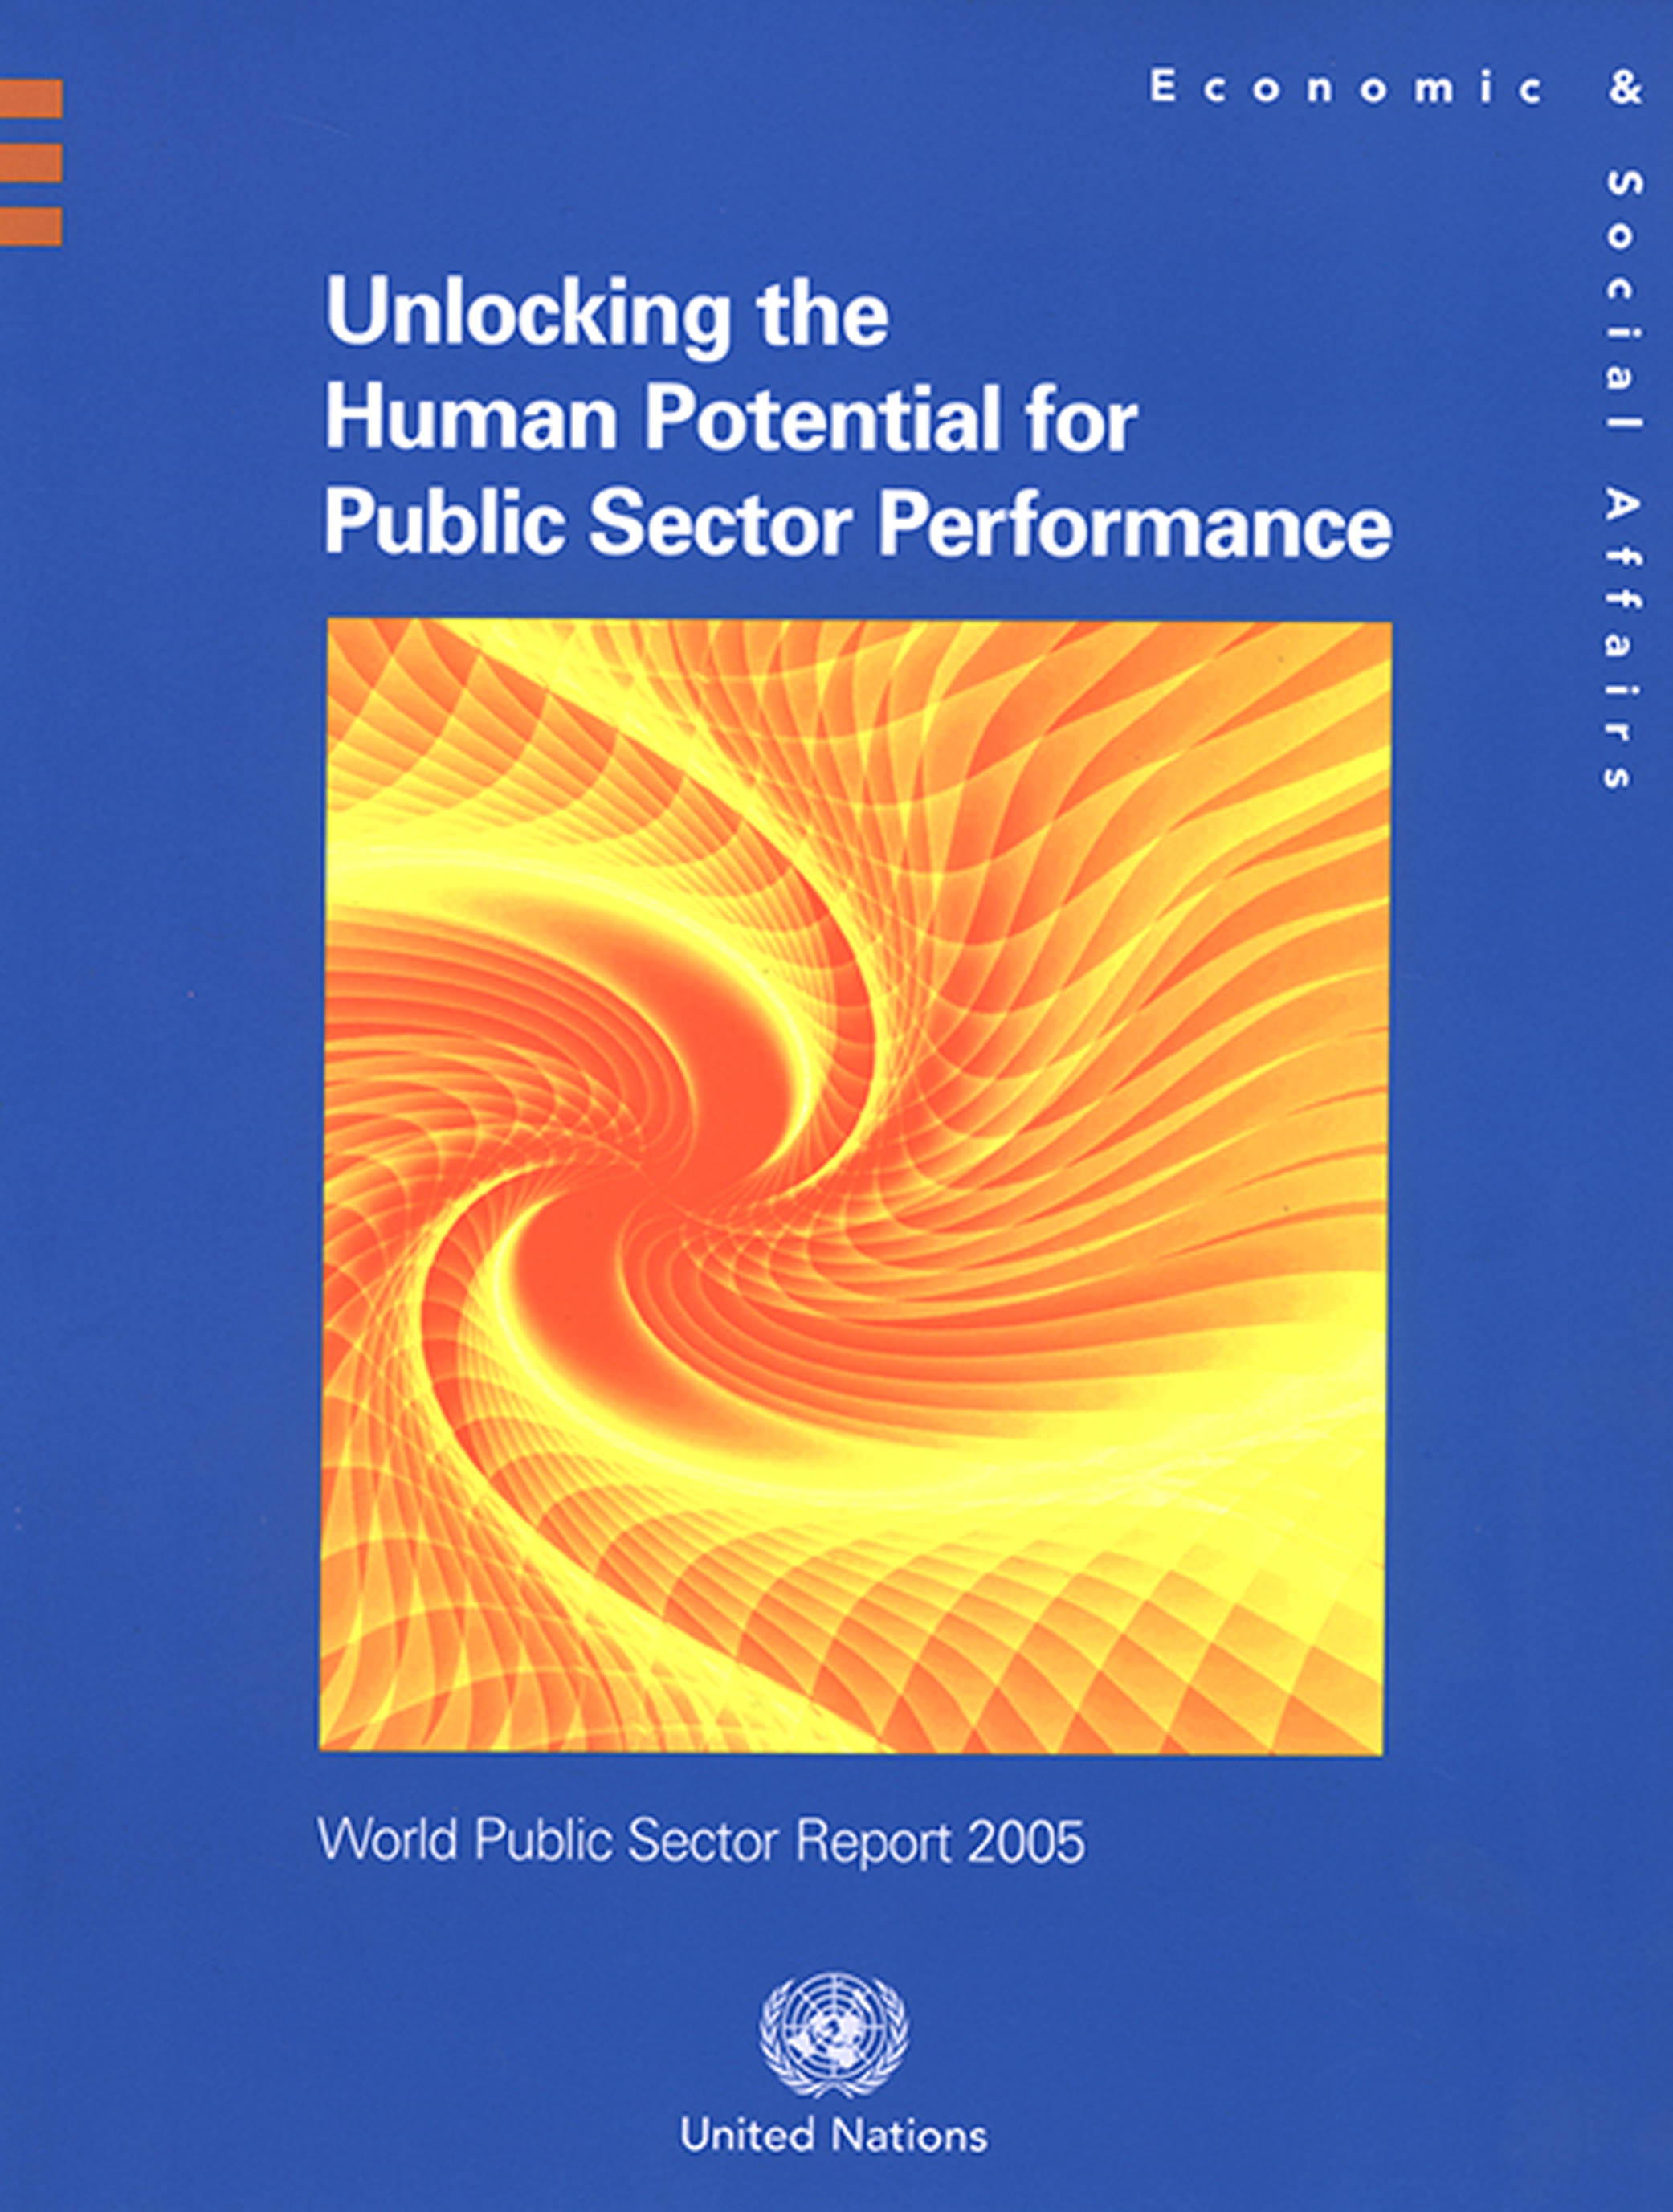 image of World Public Sector Report 2005